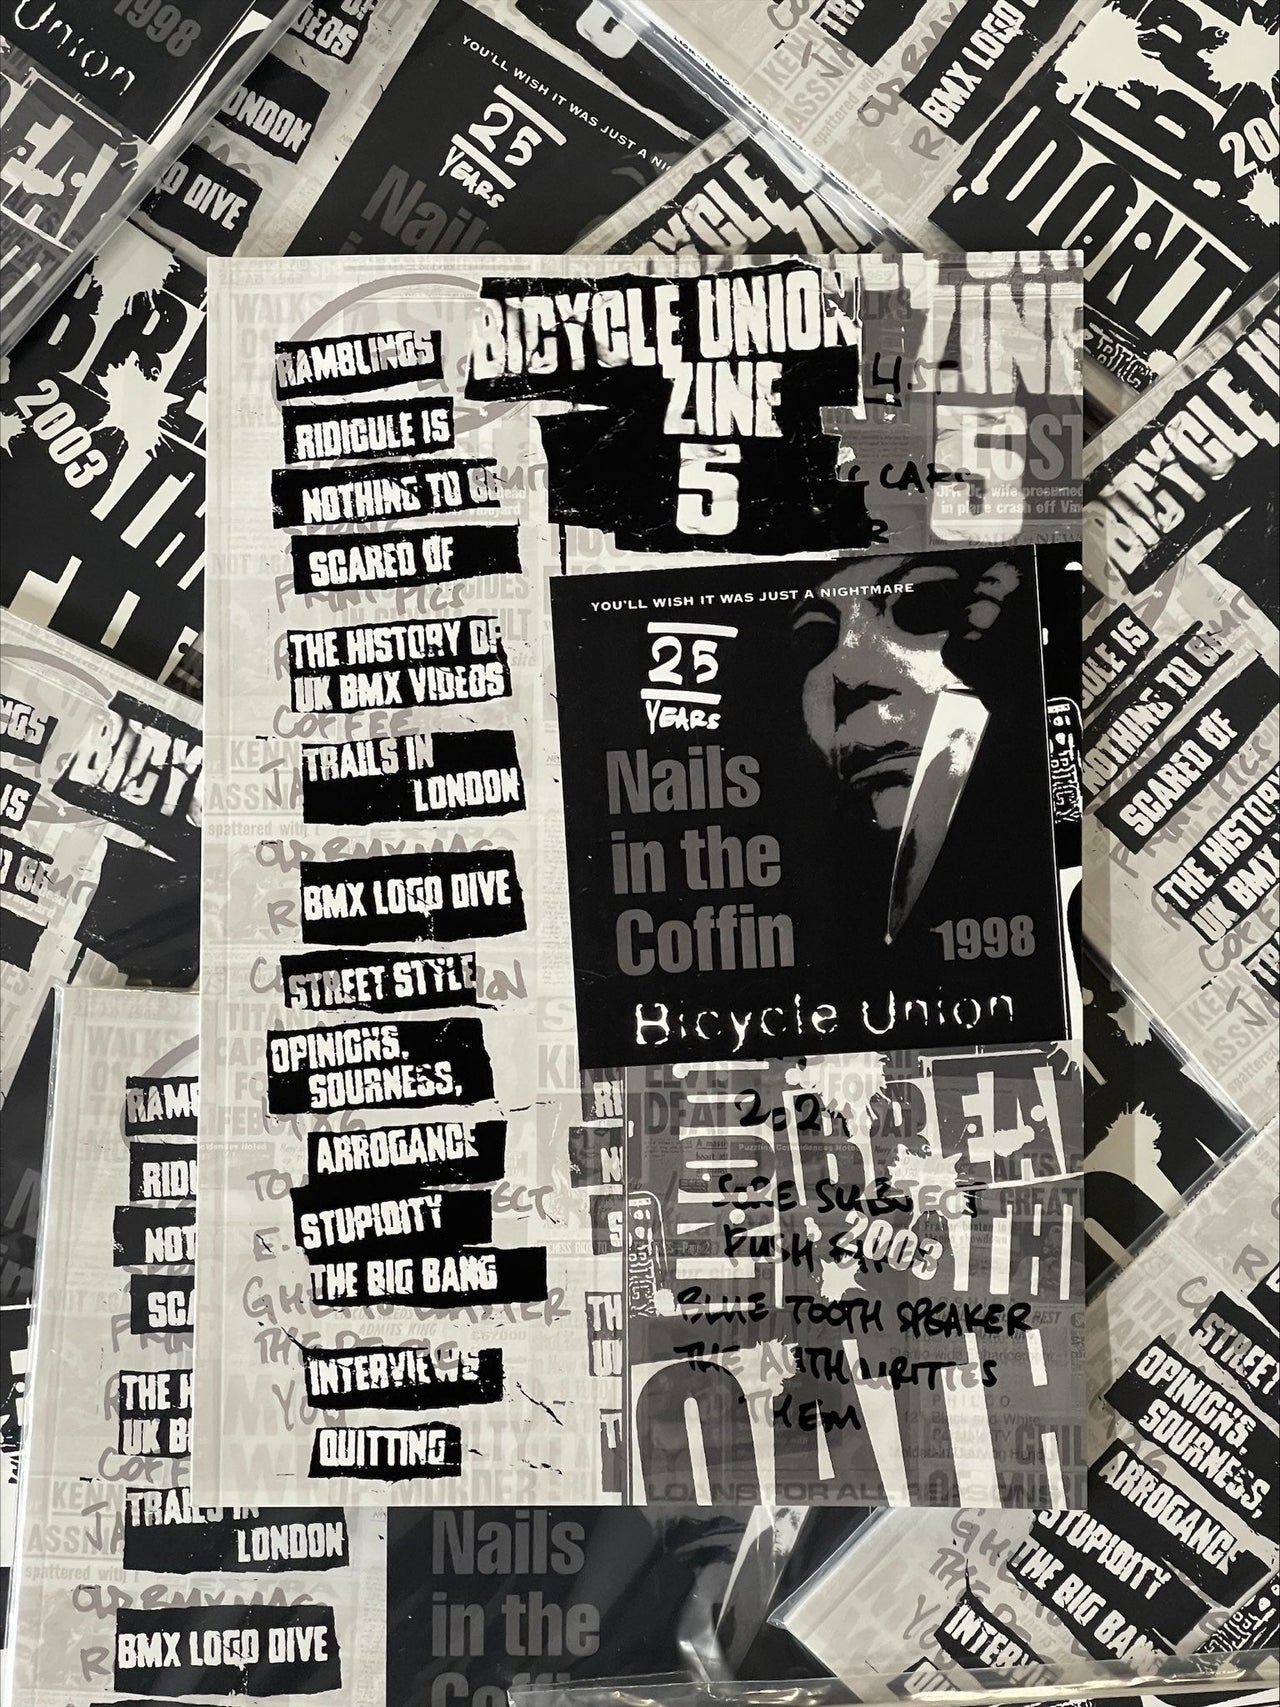 Bicycle Union Issue 5 Magazine/DVD Nails in the Coffin